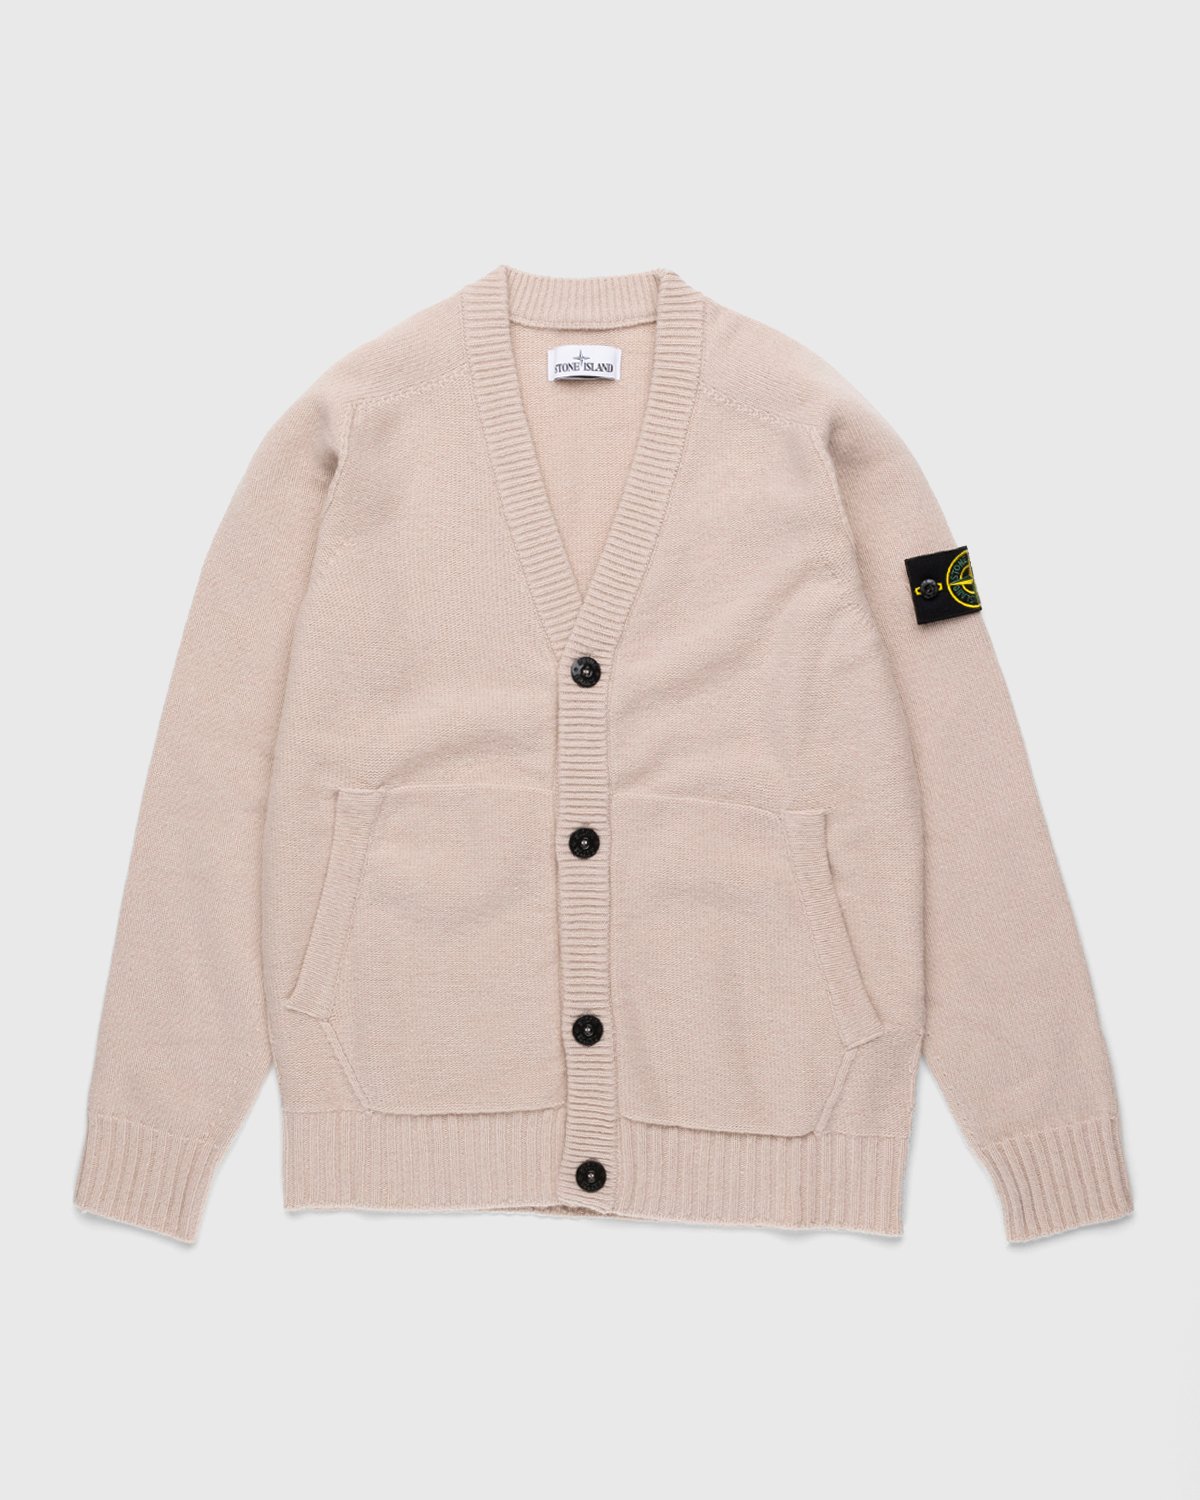 Stone Island - Knitted Cardigan Rustic Rose - Clothing - Red - Image 1